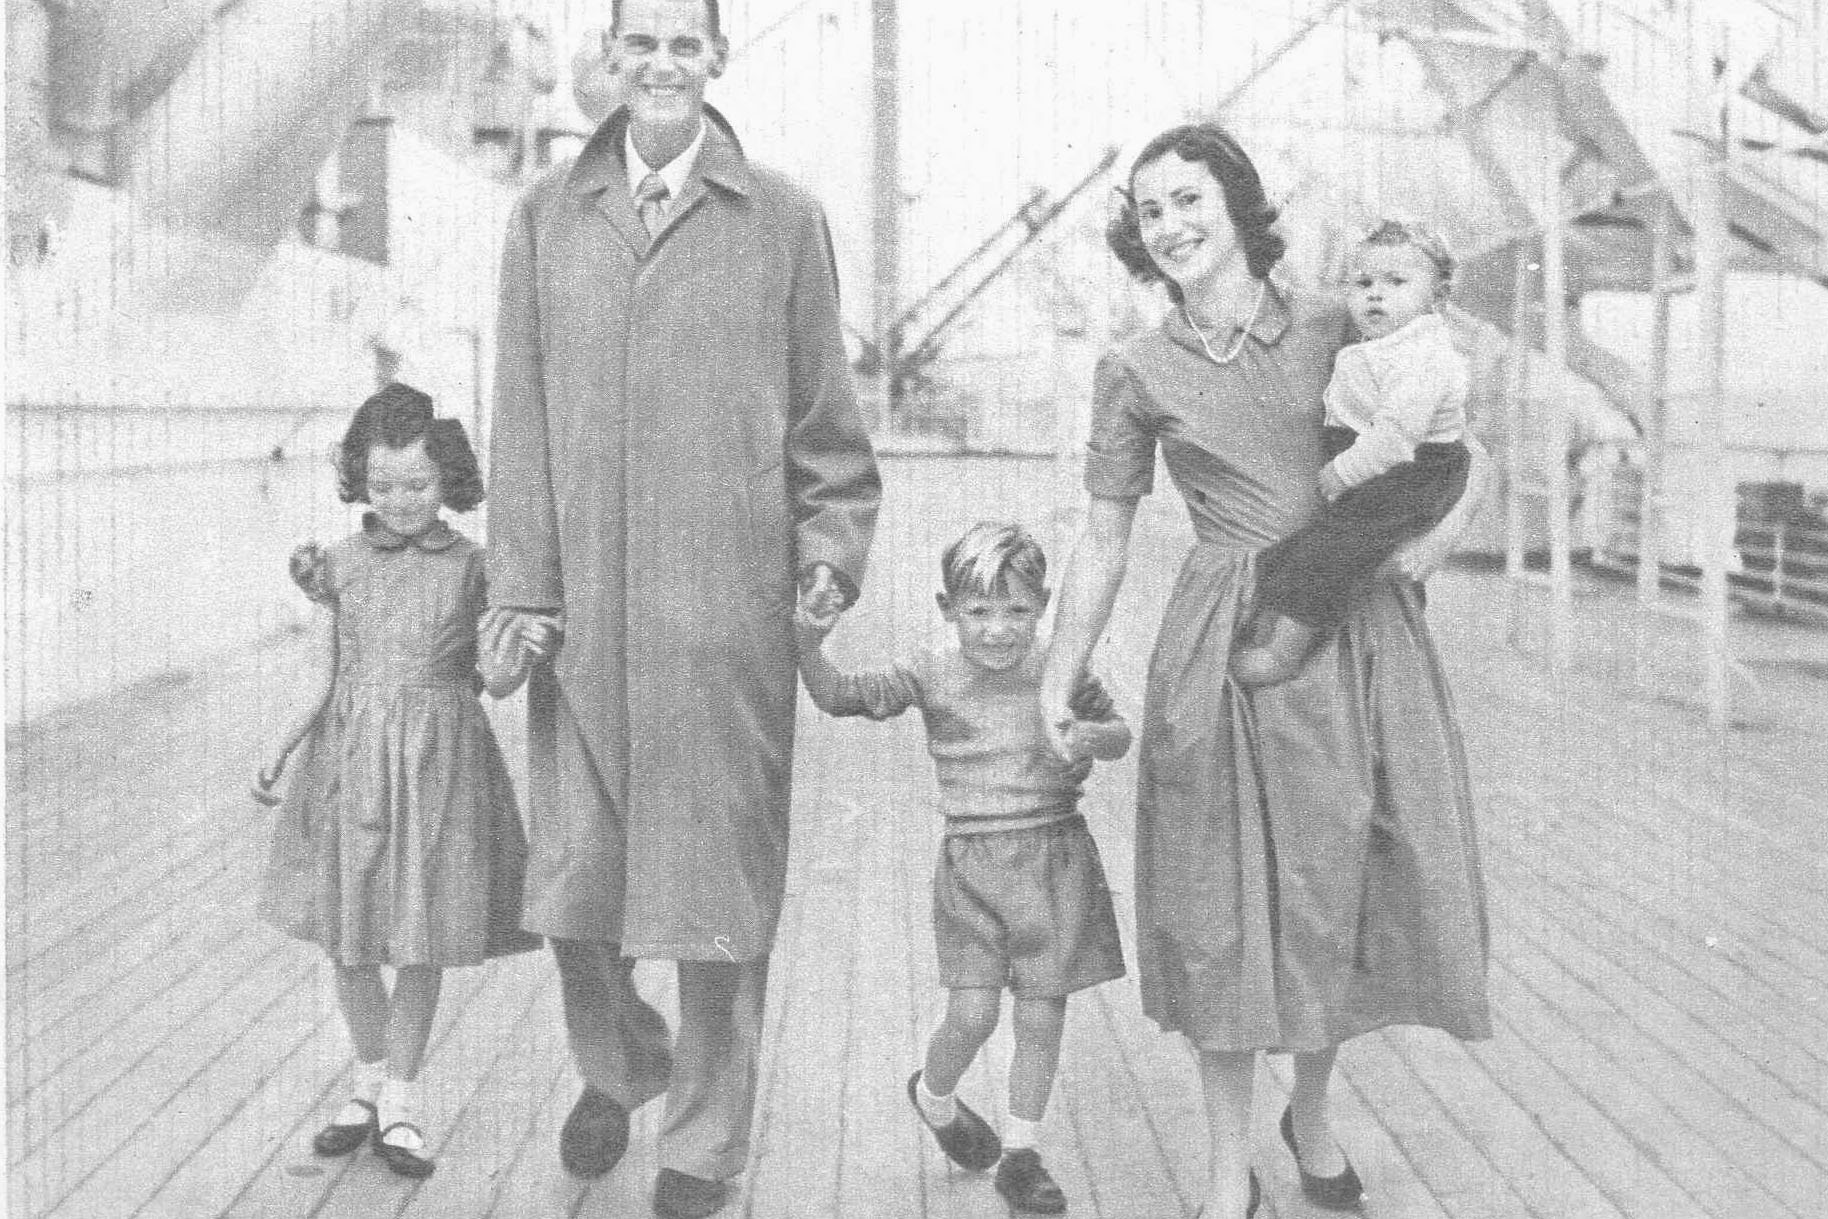 Jim Vickers-Willis and family